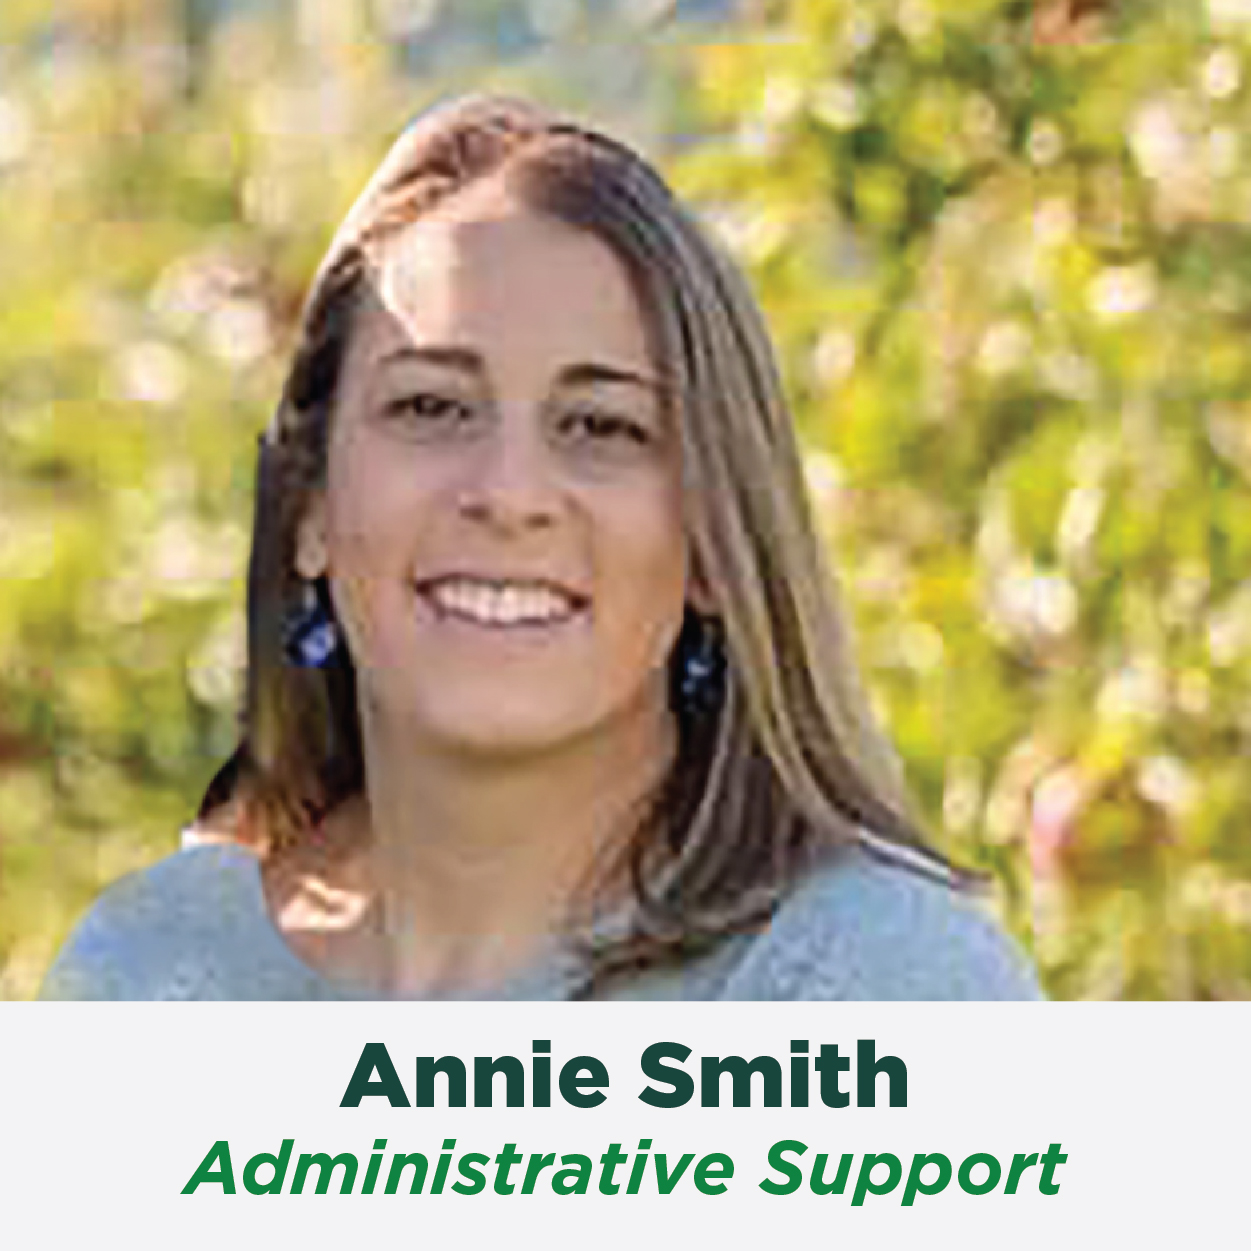 Annie Smith, Administrative Support